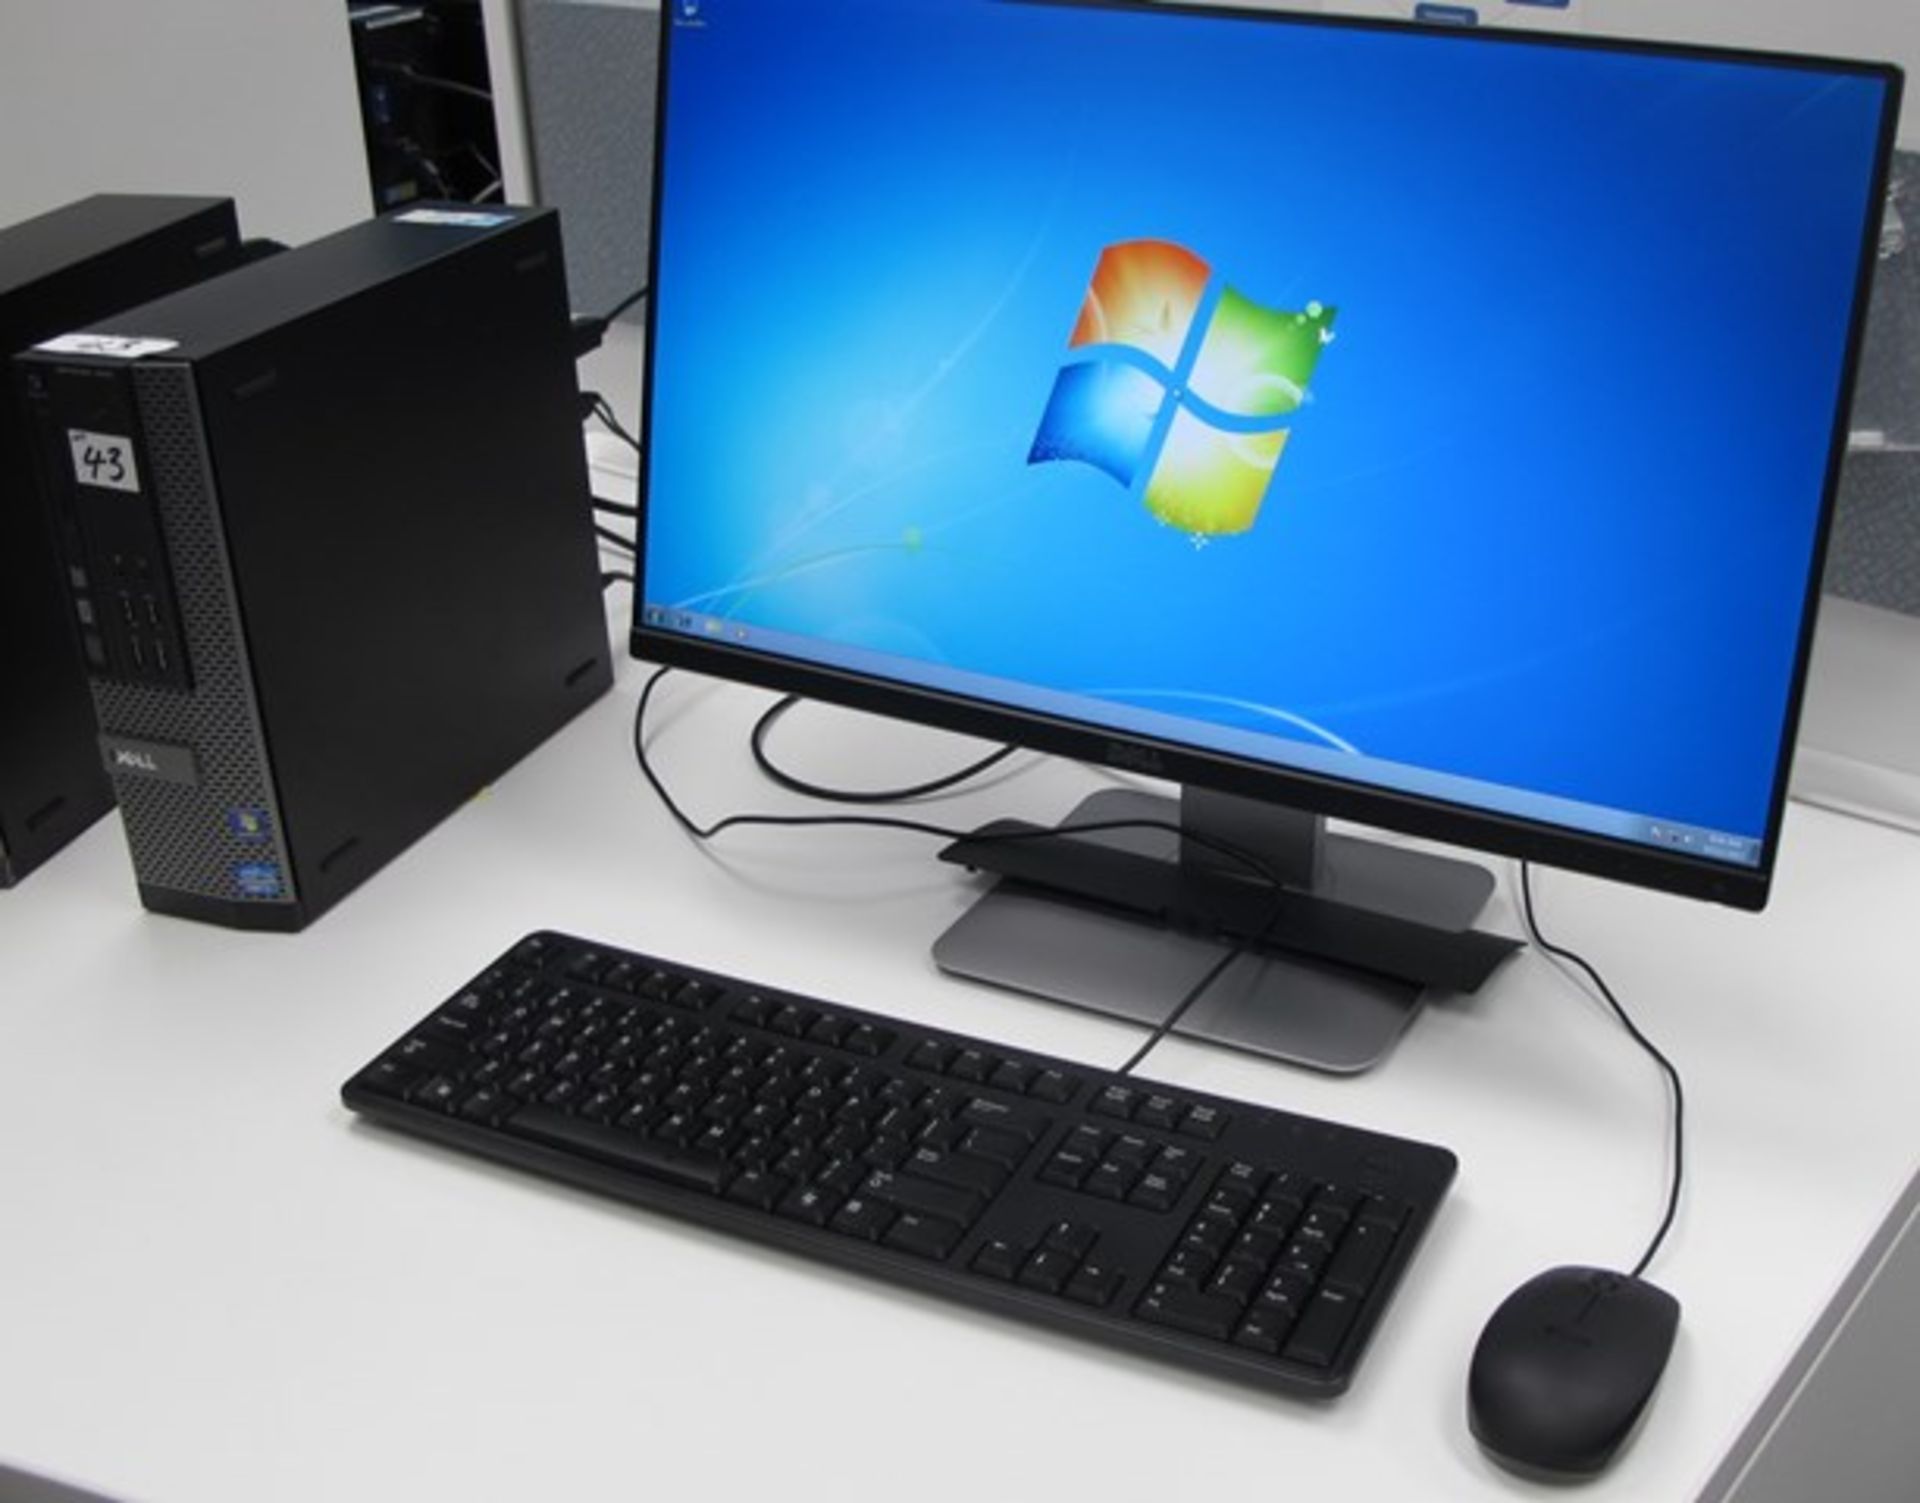 DELL OPTIPLEX 7010 i7 TOWER COMPUTER W/DELL MONITOR, KEYBOARD, MOUSE (WINDOWS 7)